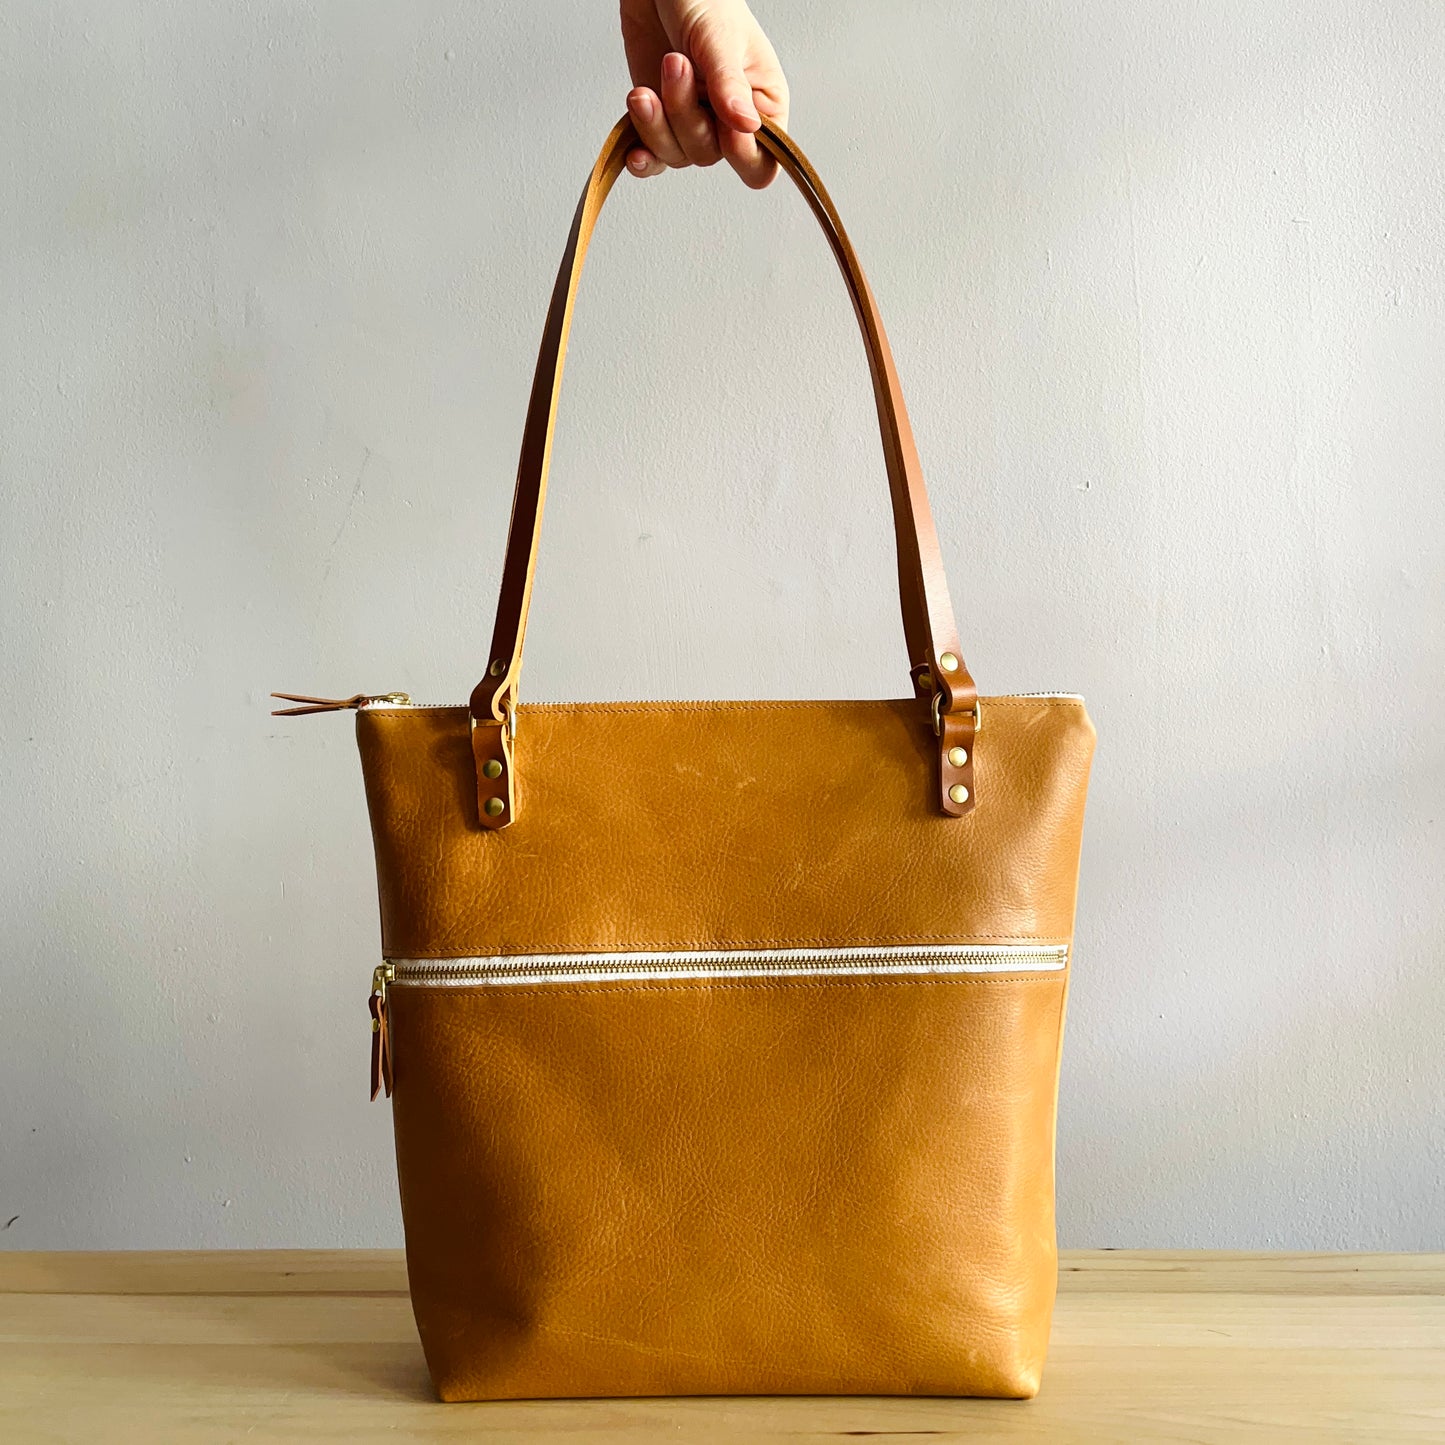 tan leather shoulder bag by Suzanne Faris